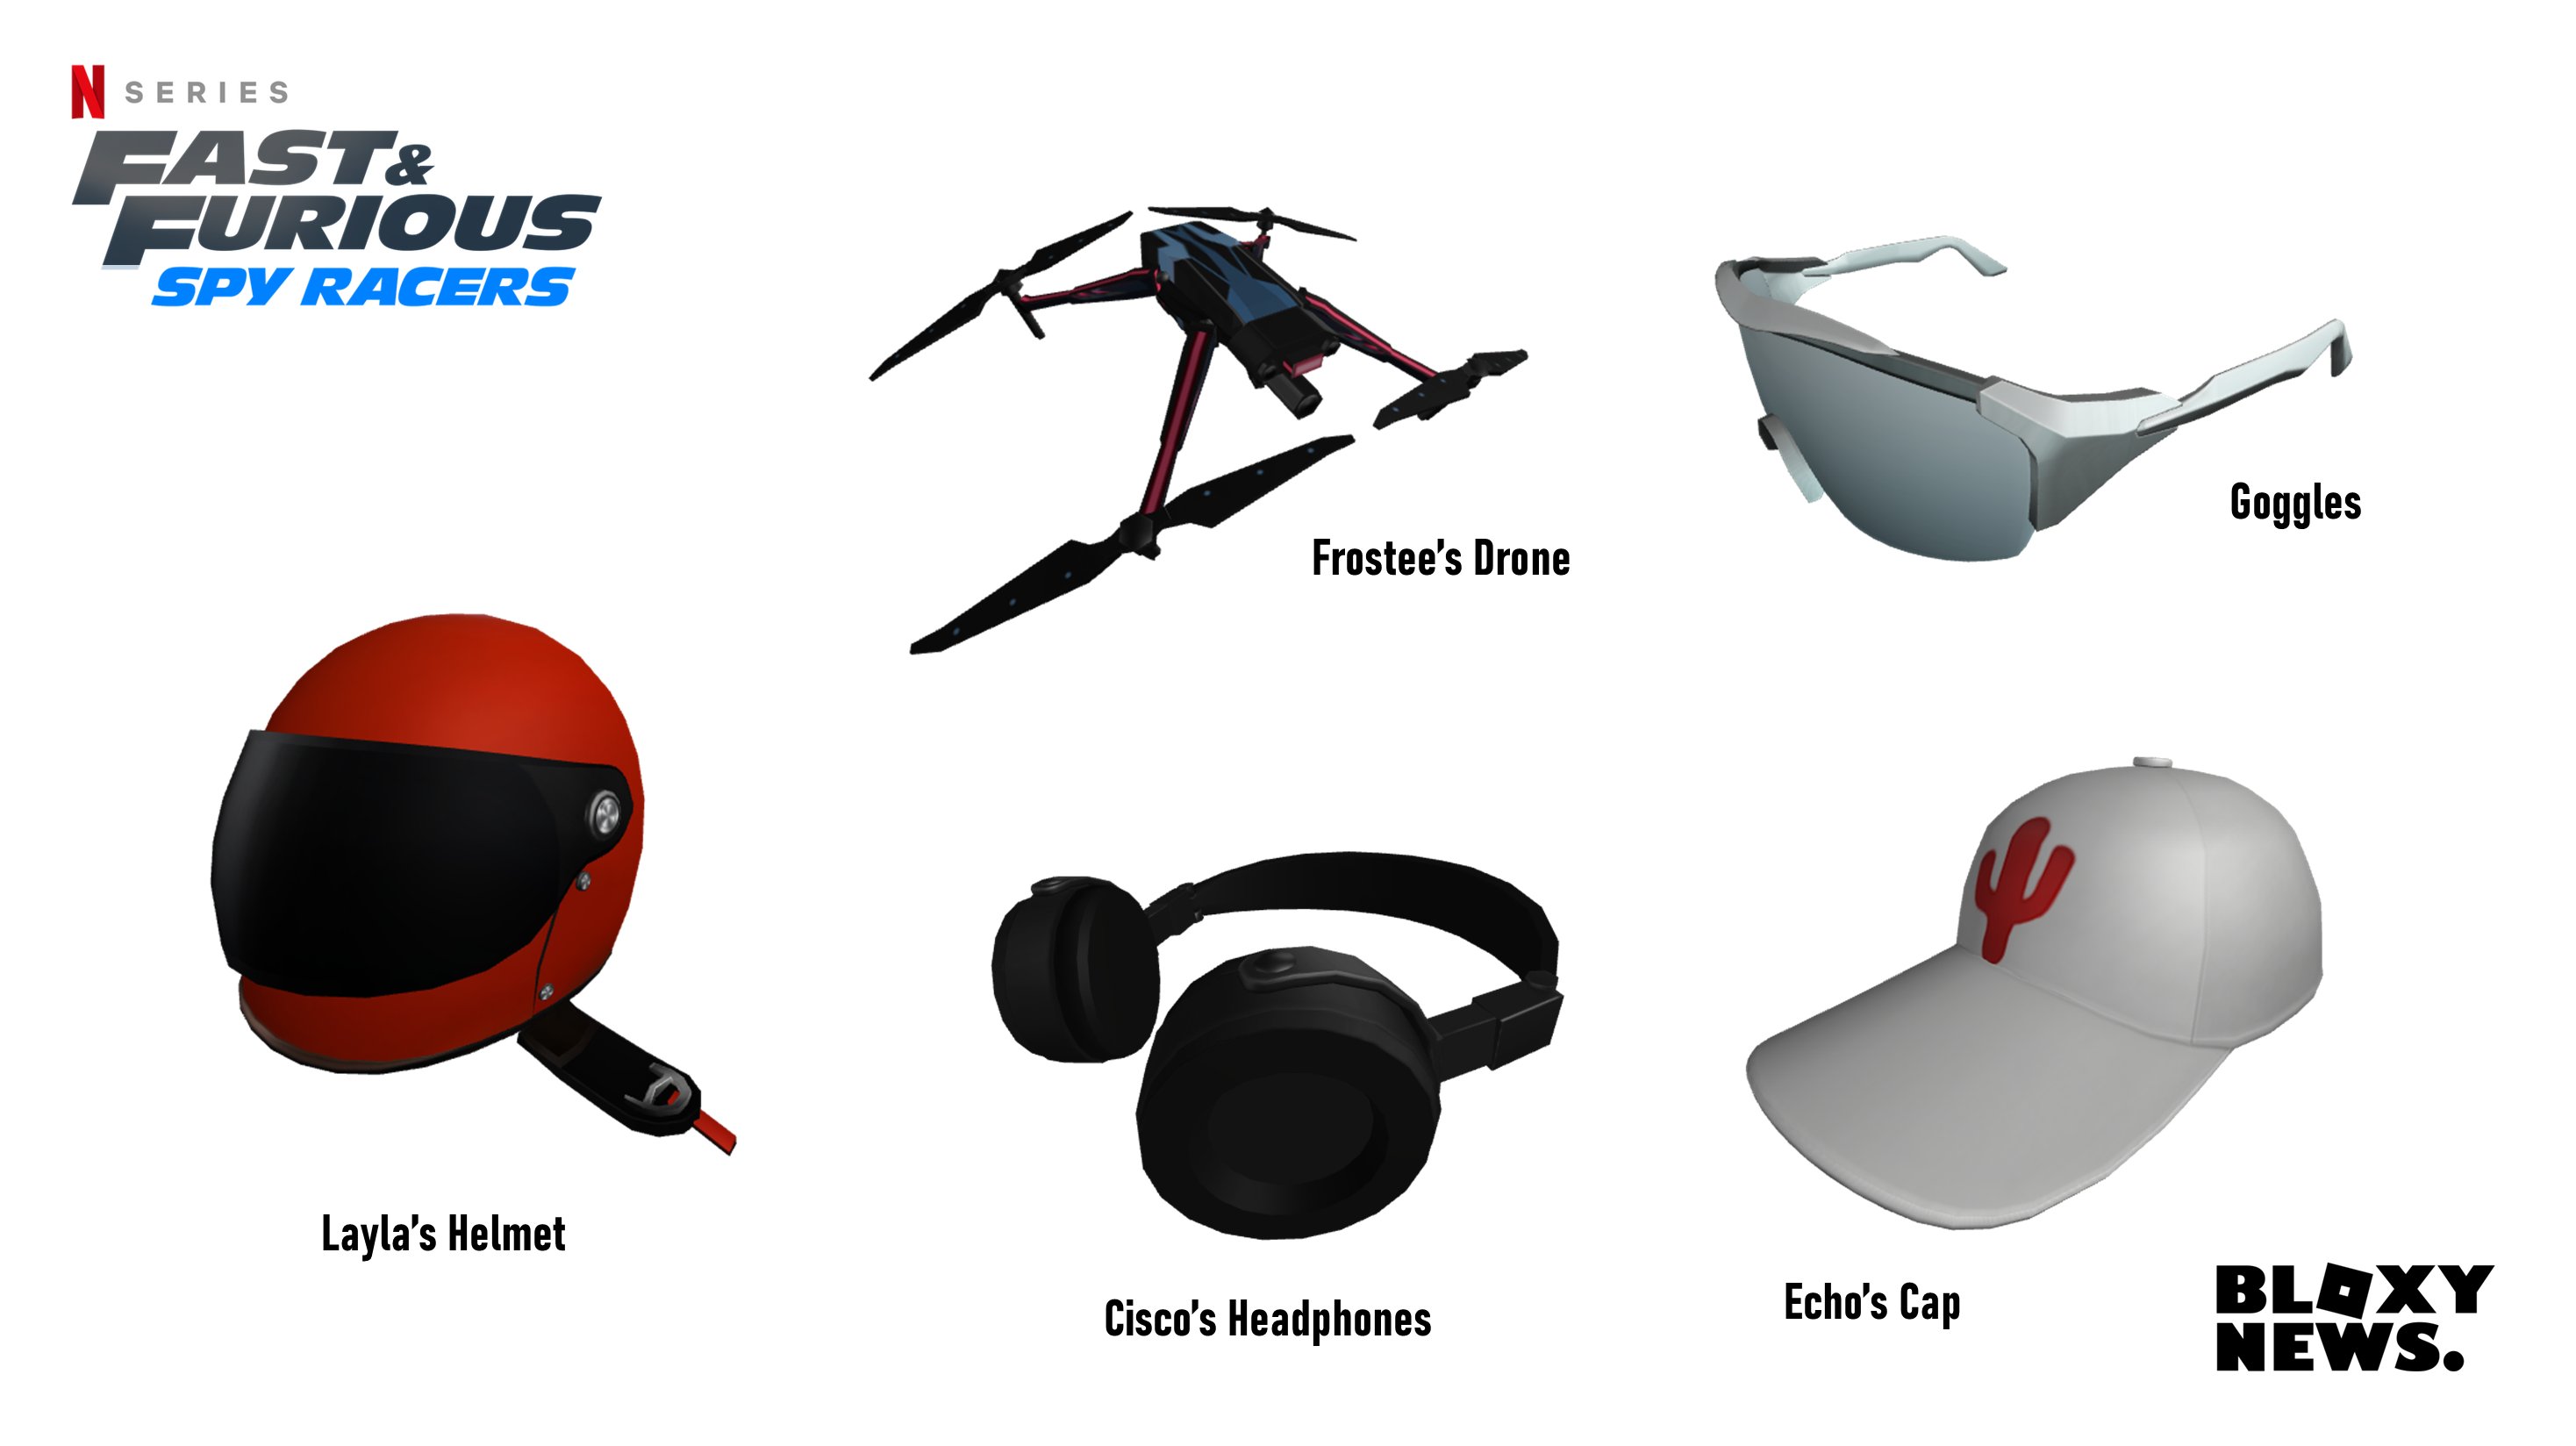 Bloxy News on X: Here are a few leaked accessories relating to a